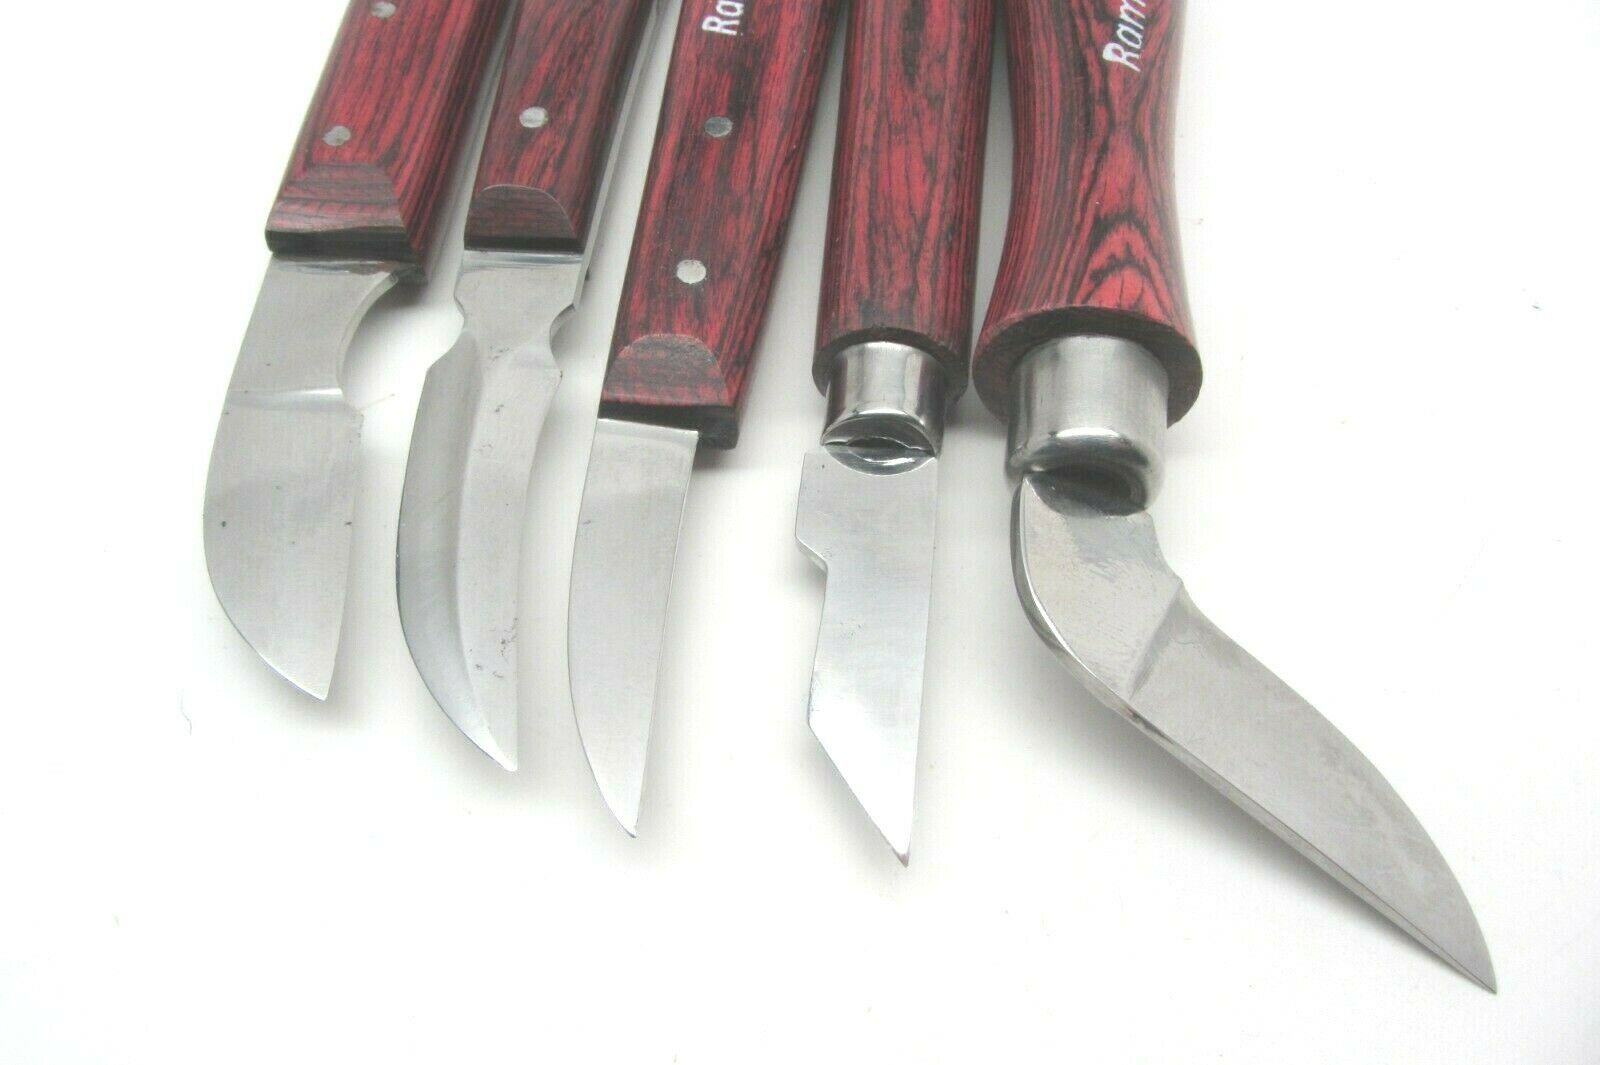 Ramelson 3-Piece Roughing Whittling and Chip Wood Carving Knife Set